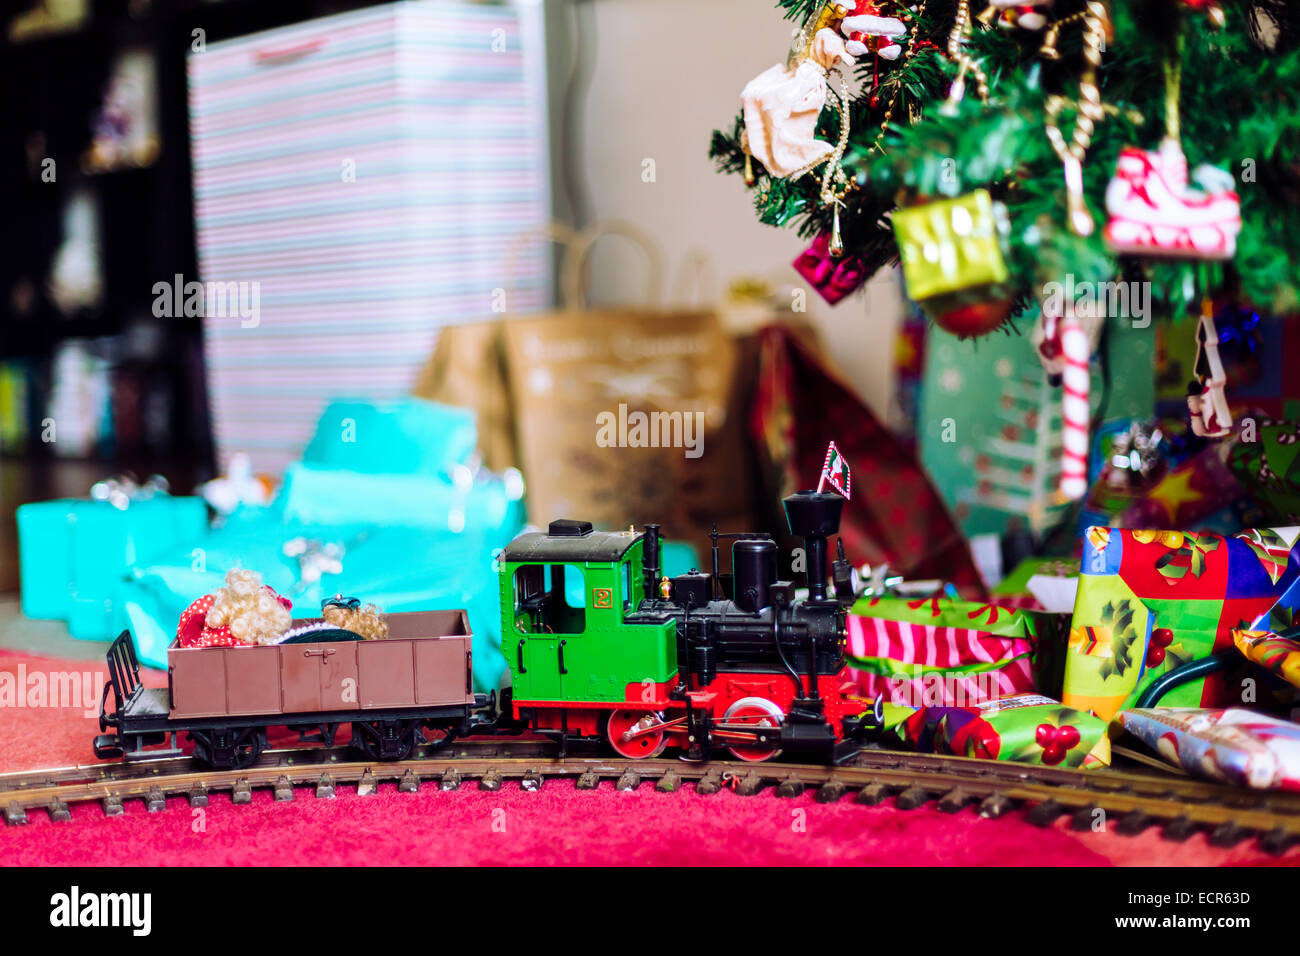 Model train with Christmas presents and tree Stock Photo